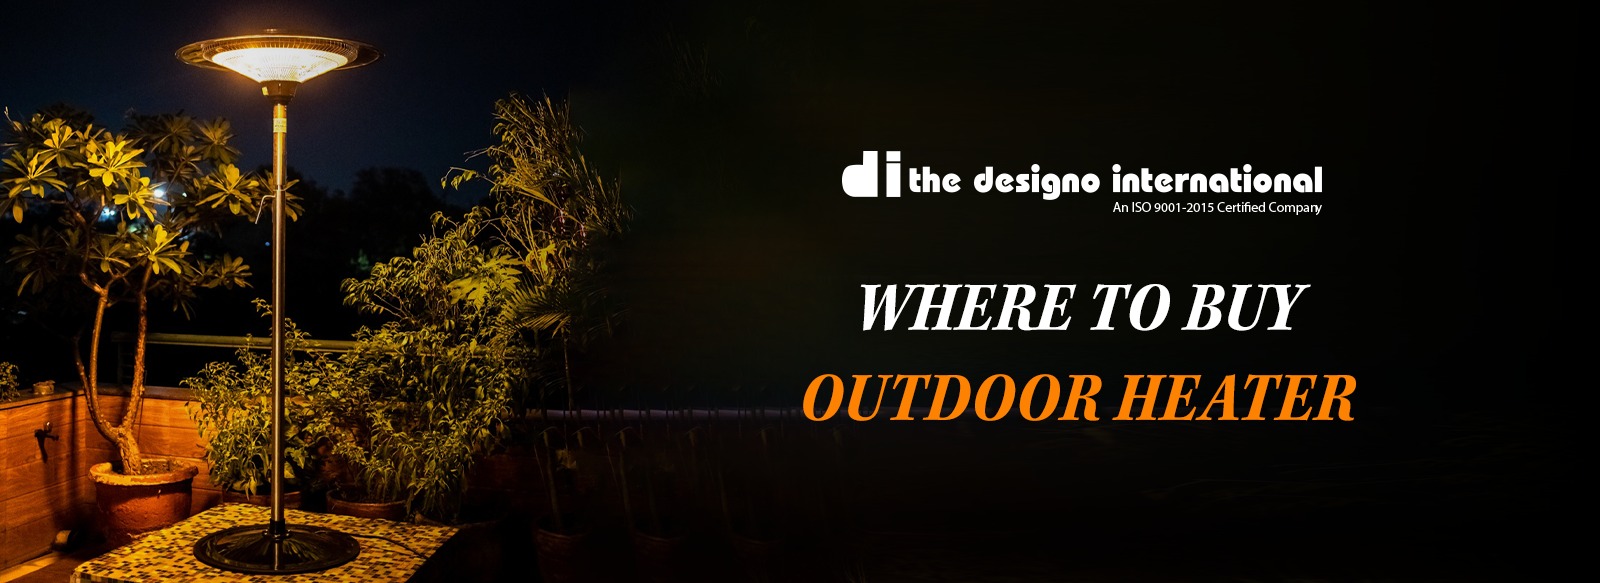 Where to Buy Outdoor Heater